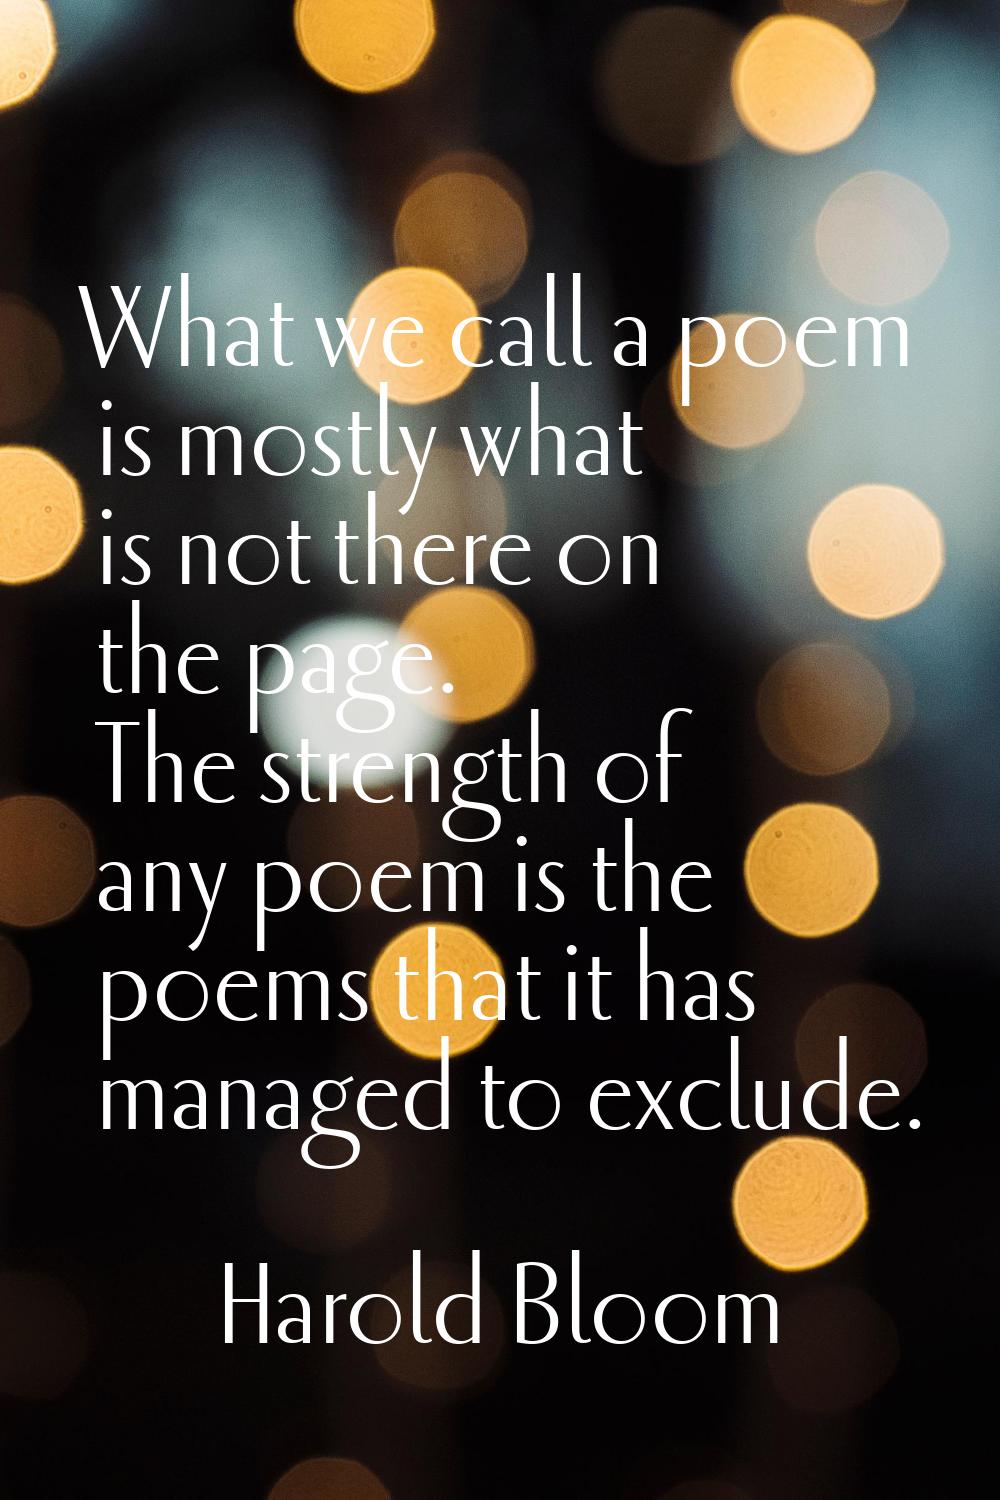 What we call a poem is mostly what is not there on the page. The strength of any poem is the poems 